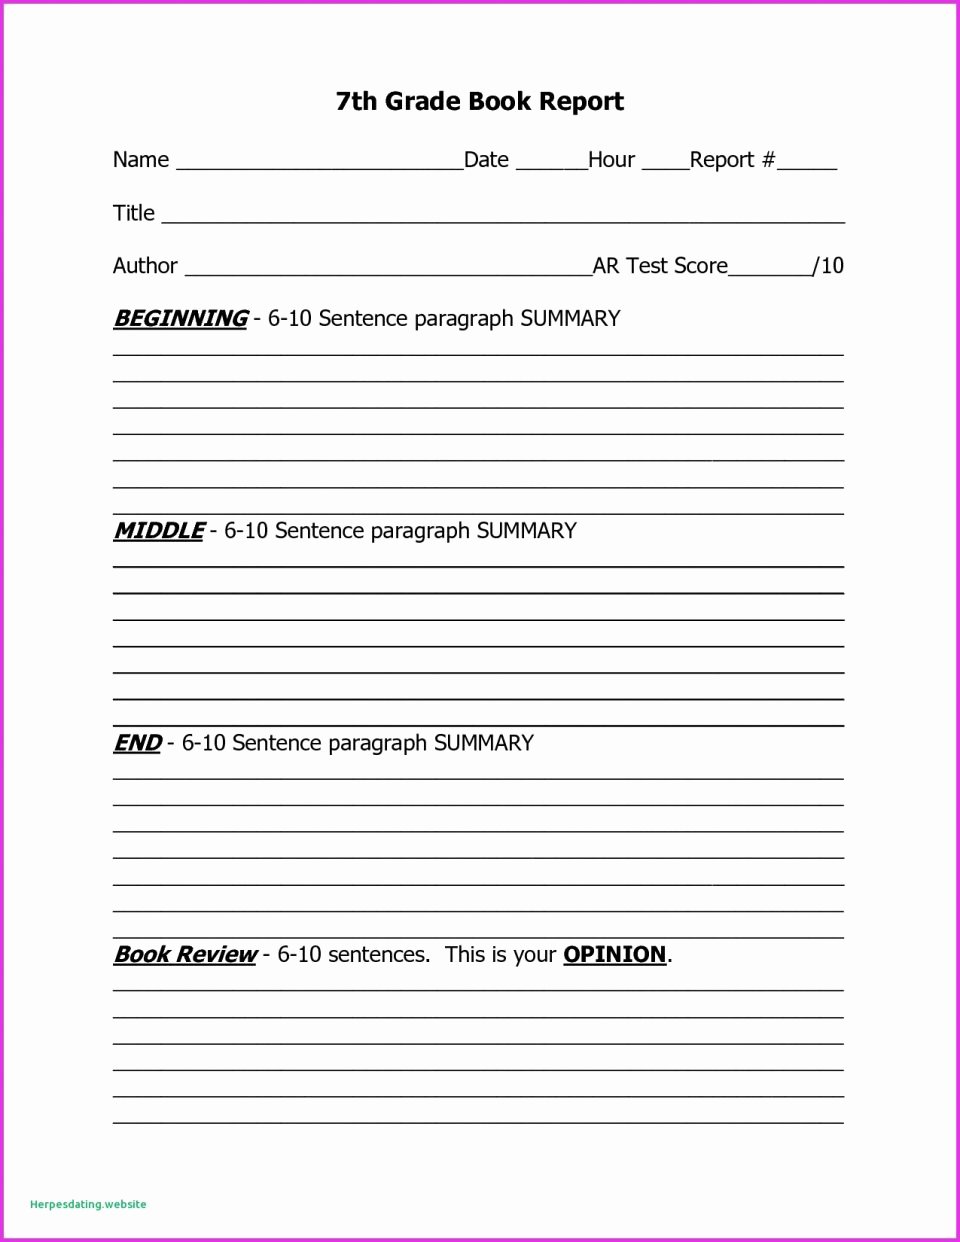 Biography Report Template Pdf Fresh Biography Book Report Template 3rd Grade Elementary form